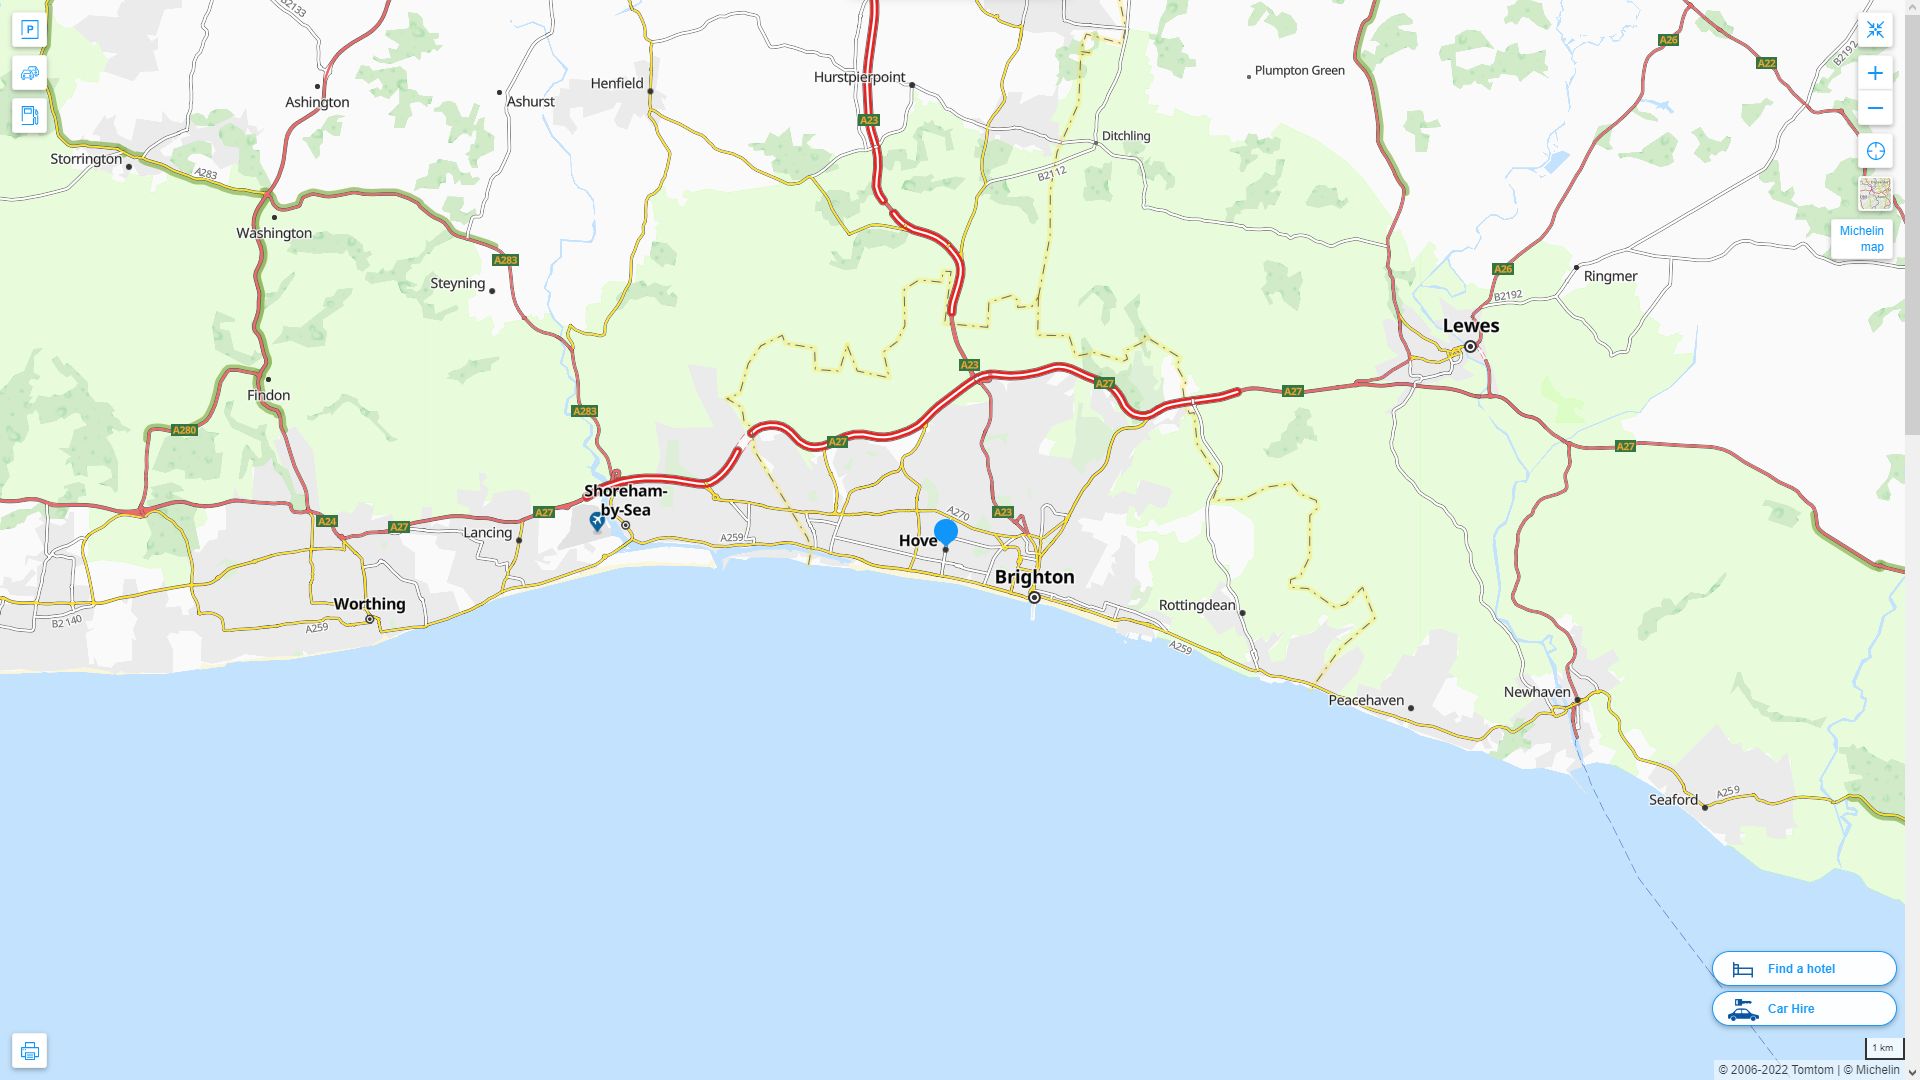 Hove Highway and Road Map